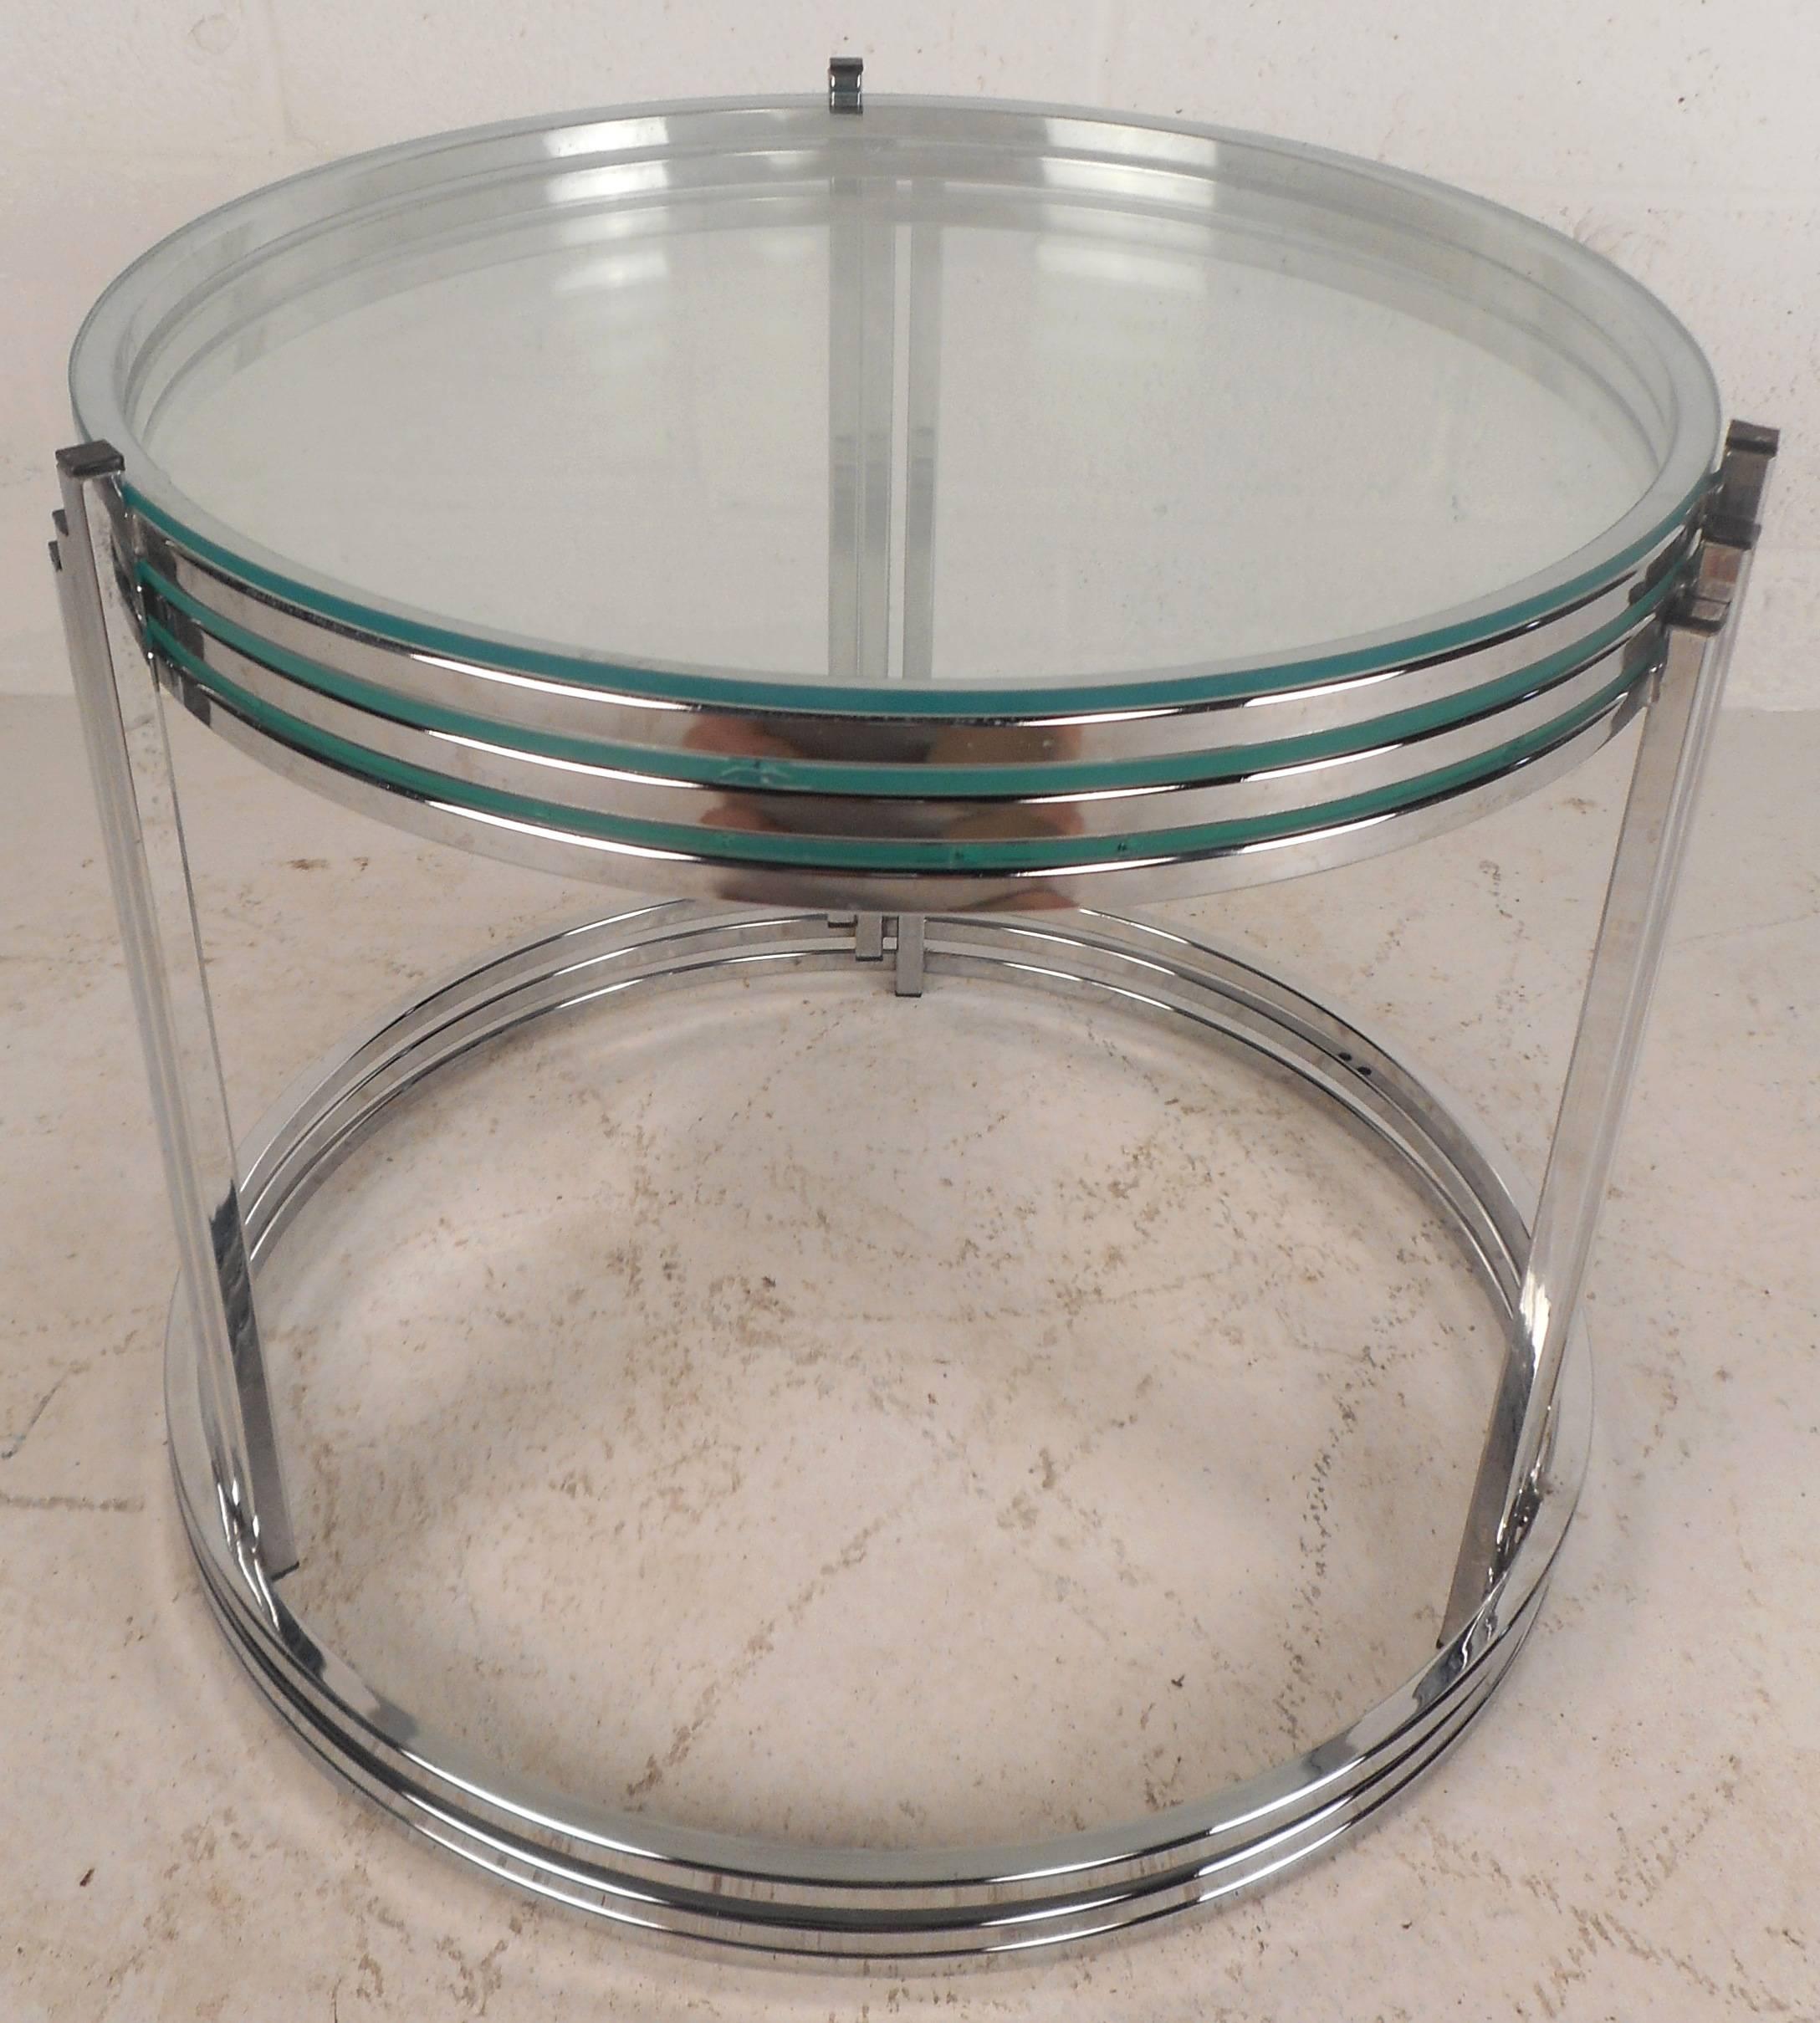 Elegant set of three vintage modern stacking tables feature a sleek circular chrome frame with vertical supports. Stylish design allows each table to sit comfortably on top of each other for convenient storage. The thick glass has a slight tint of